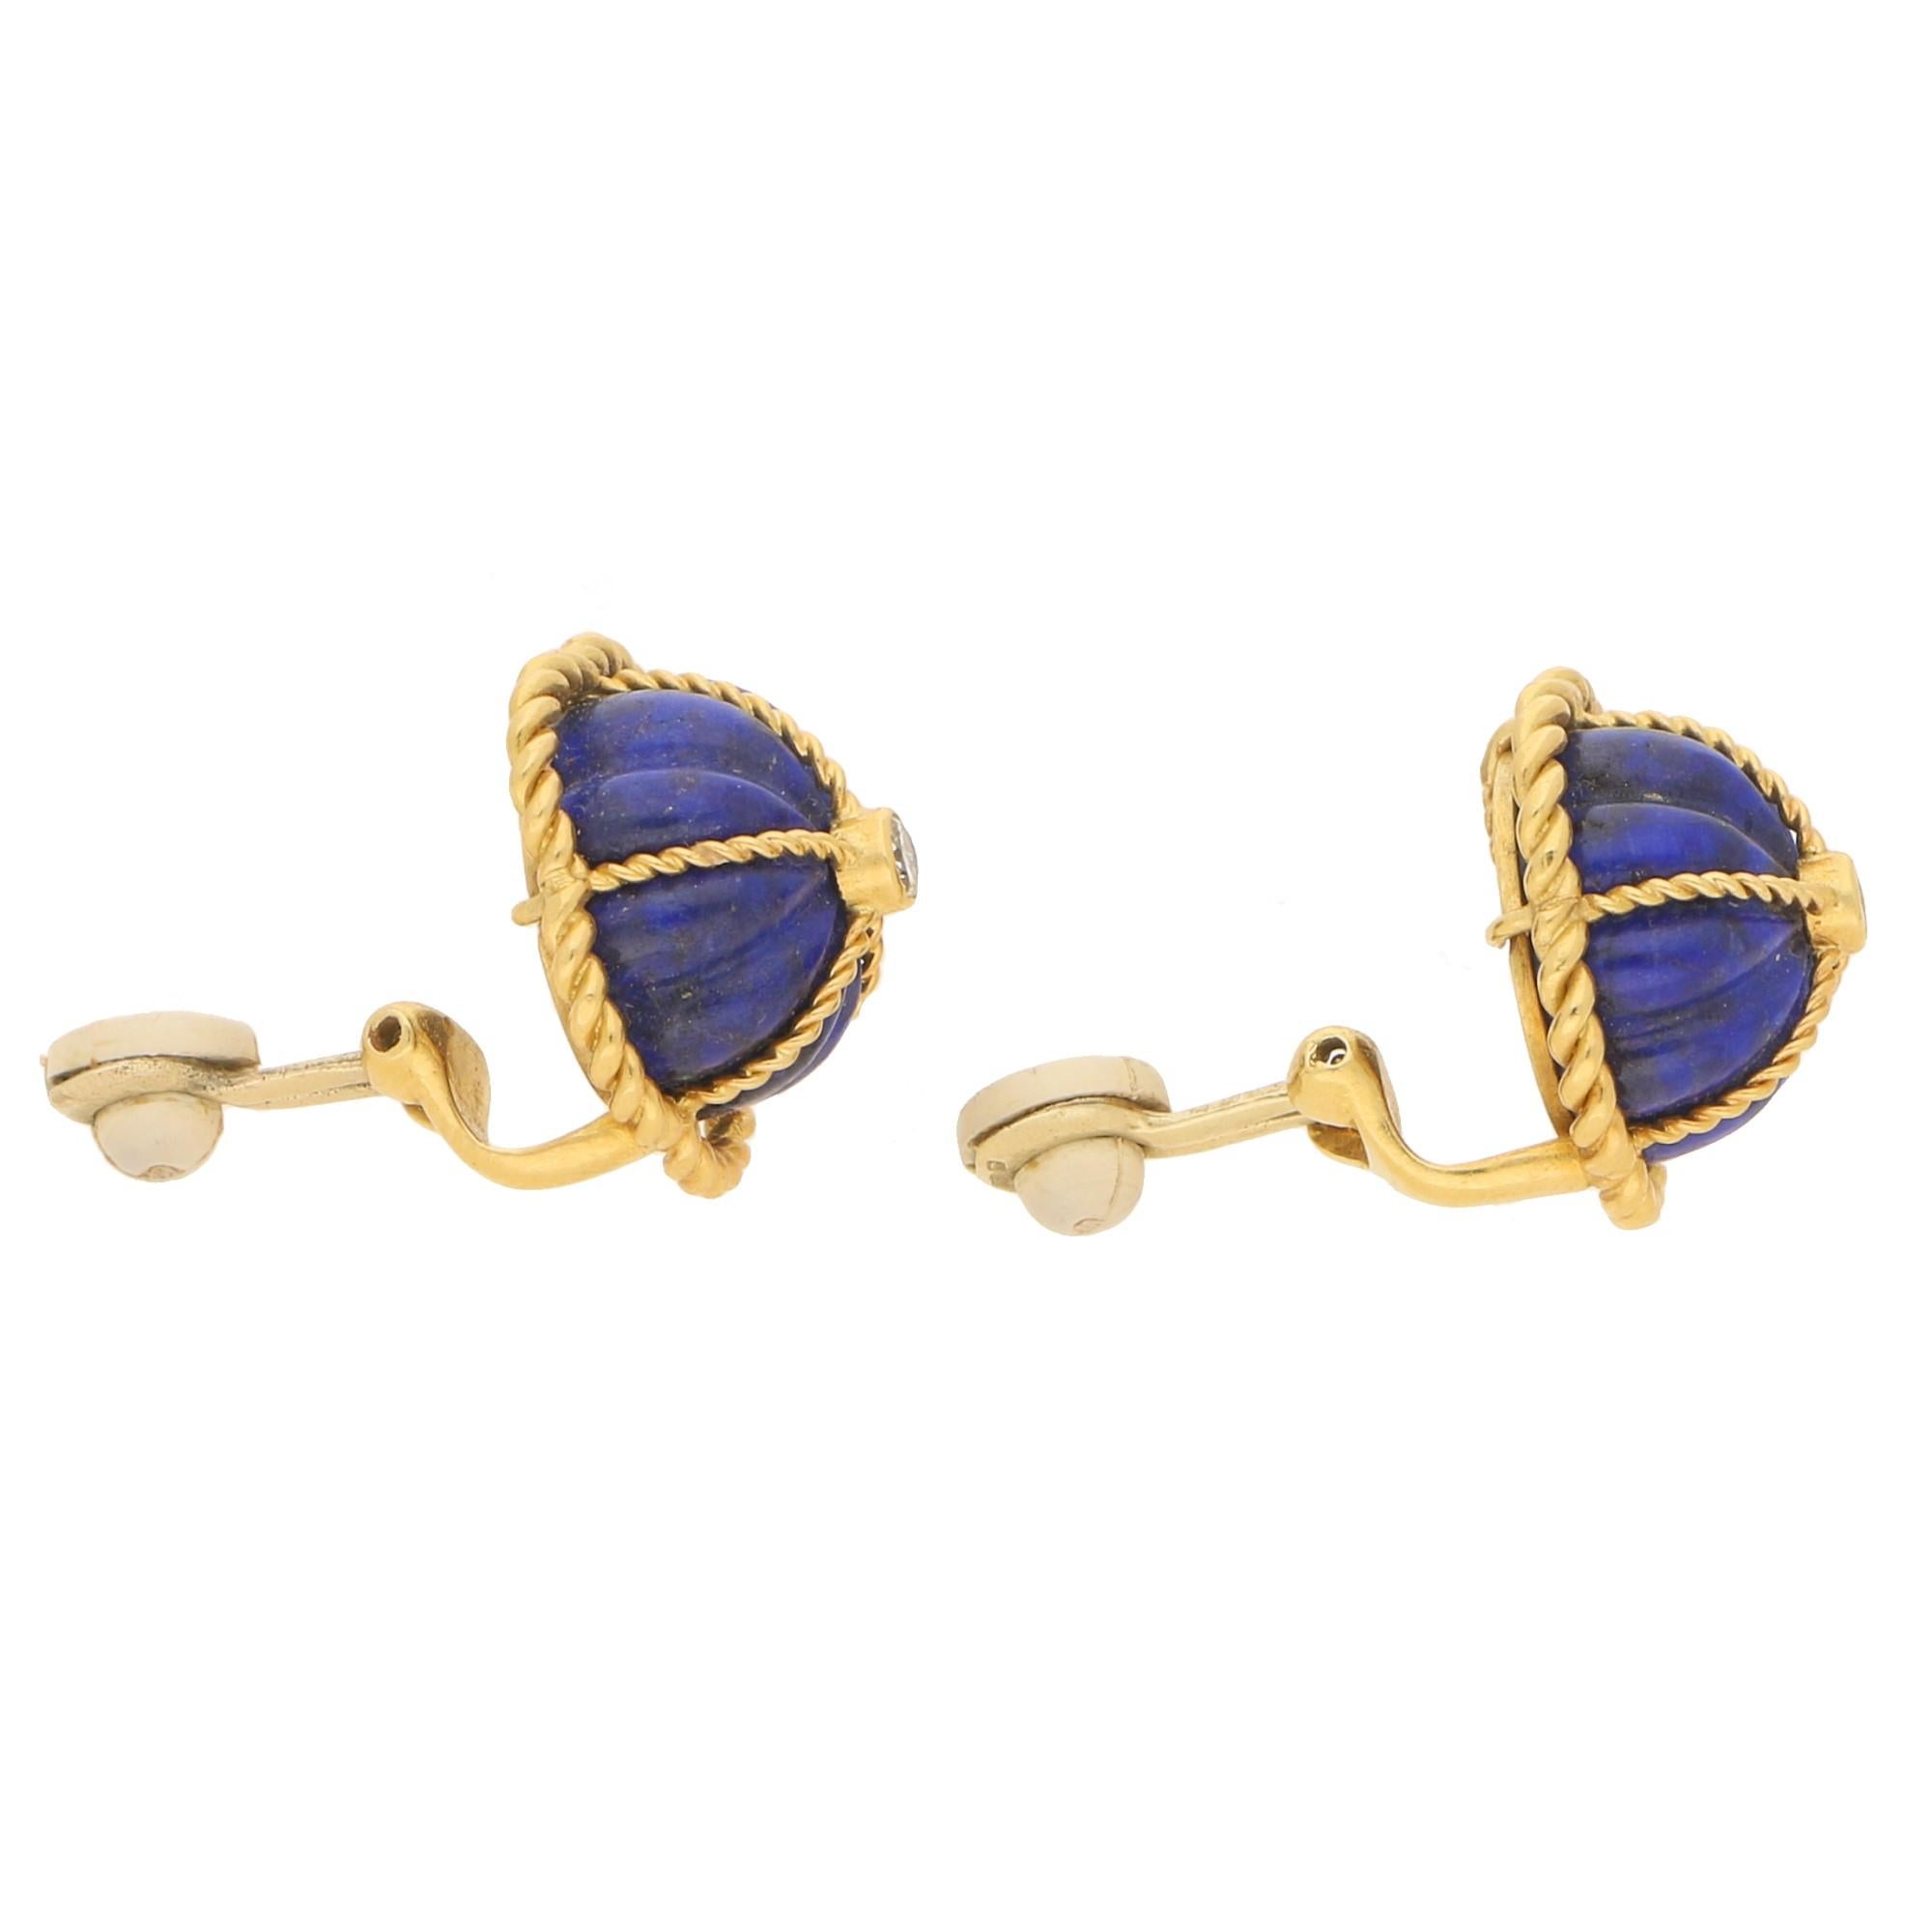 Round Cut 1970s Lapis Lazuli and Diamond Domed Clip-On Earrings in 18 Karat Yellow Gold